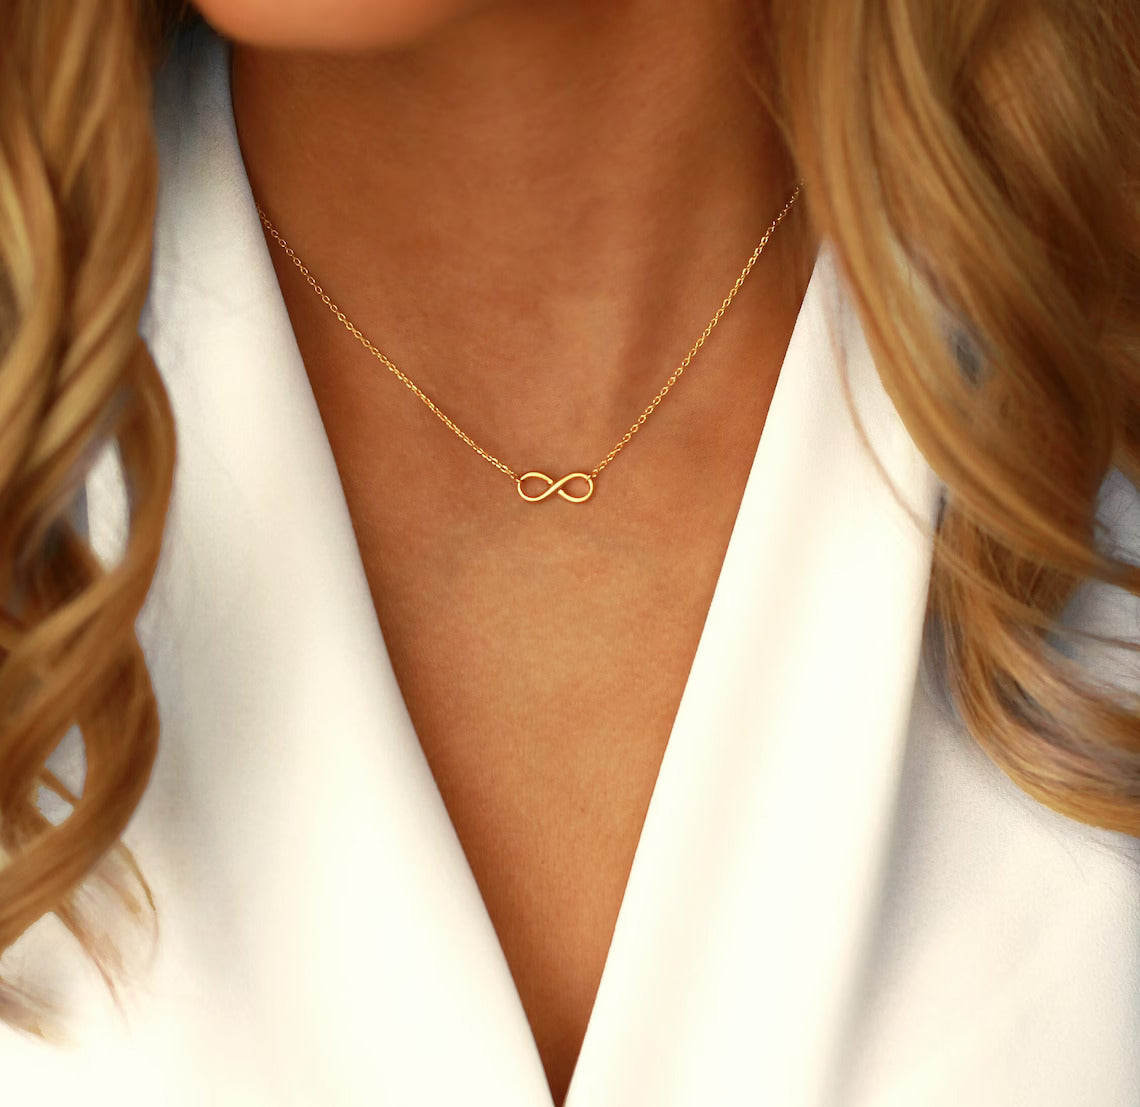 18 Carat Gold Infinity Necklace - A symbol of timeless union, capturing the enduring connections and infinite elegance inspired by Arabian jewelry in the heart of the UAE.